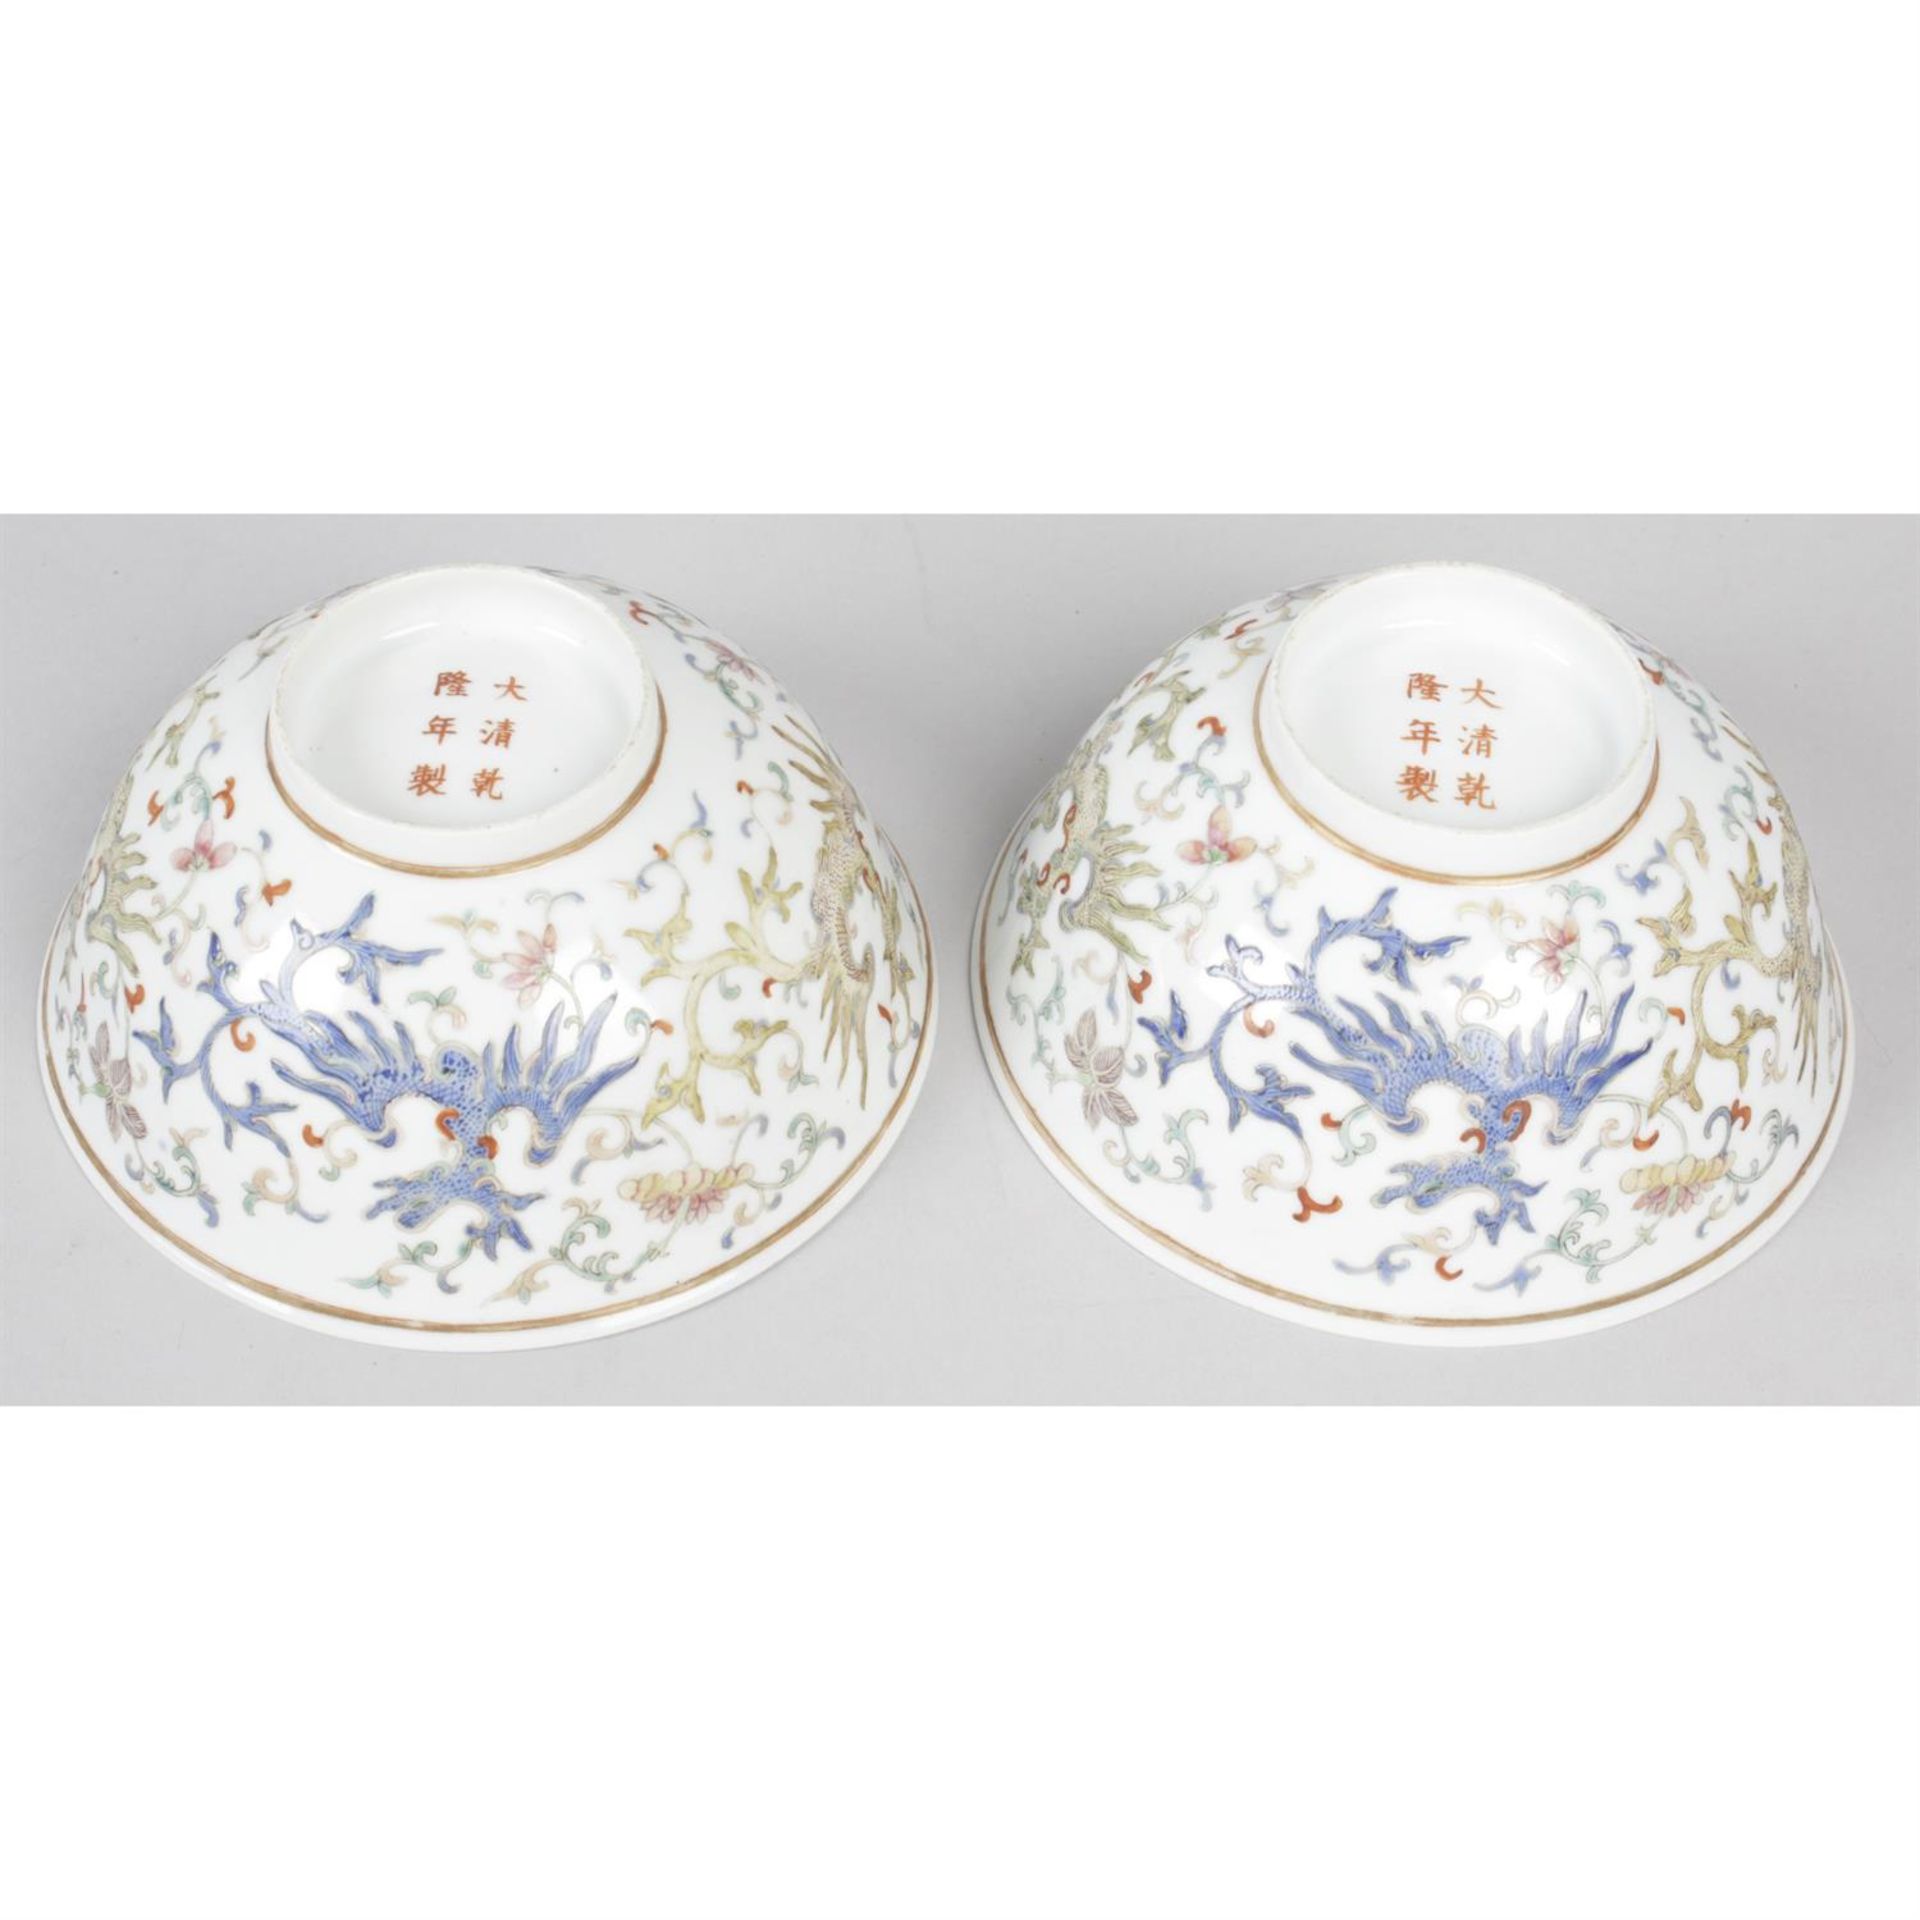 A pair of Chinese porcelain bowls. - Image 2 of 2